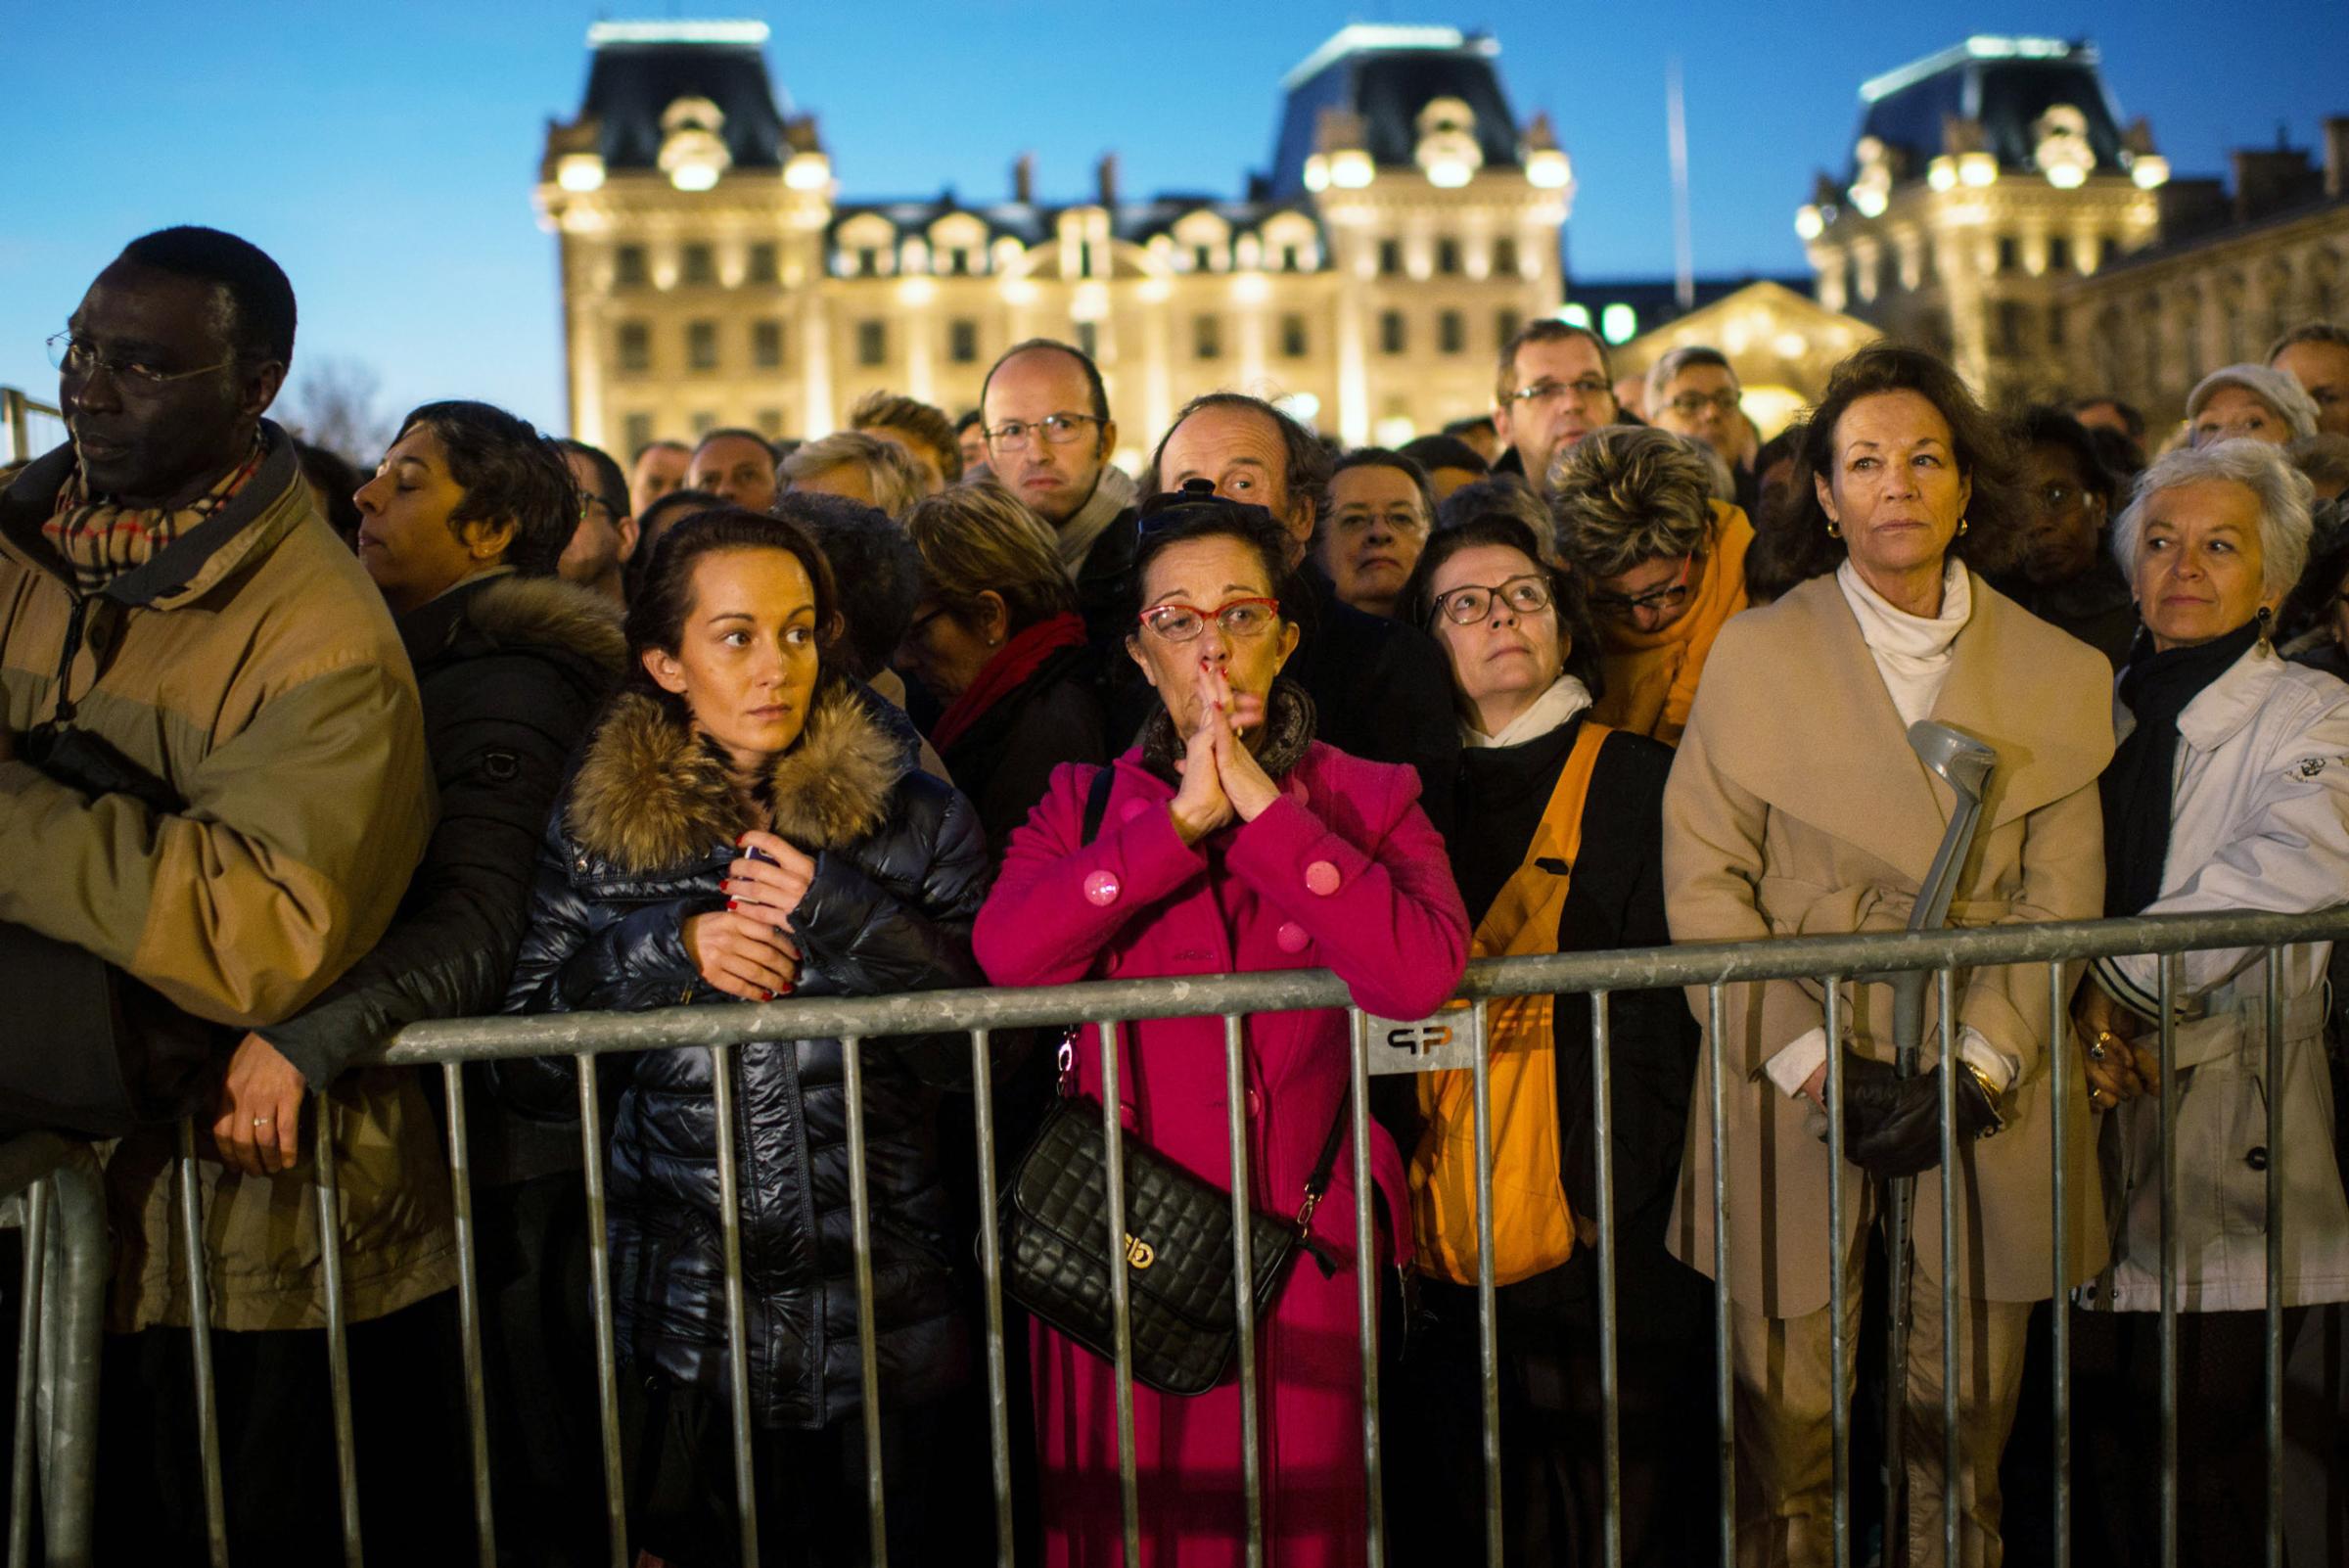 PARIS, FRANCE - NOVEMBER 15: People gather outside of Notre Dame cathedral ahead of a ceremony to the victims of friday's terrorist attacks on November 15, 2015 in Paris, France. As France observes three days of national mourning members of the public continue to pay tribute to the victims of Friday's deadly attacks. A special service for the families of the victims and survivors is to be held at Paris's Notre Dame Cathedral later on Sunday. (Photo by David Ramos/Getty Images)